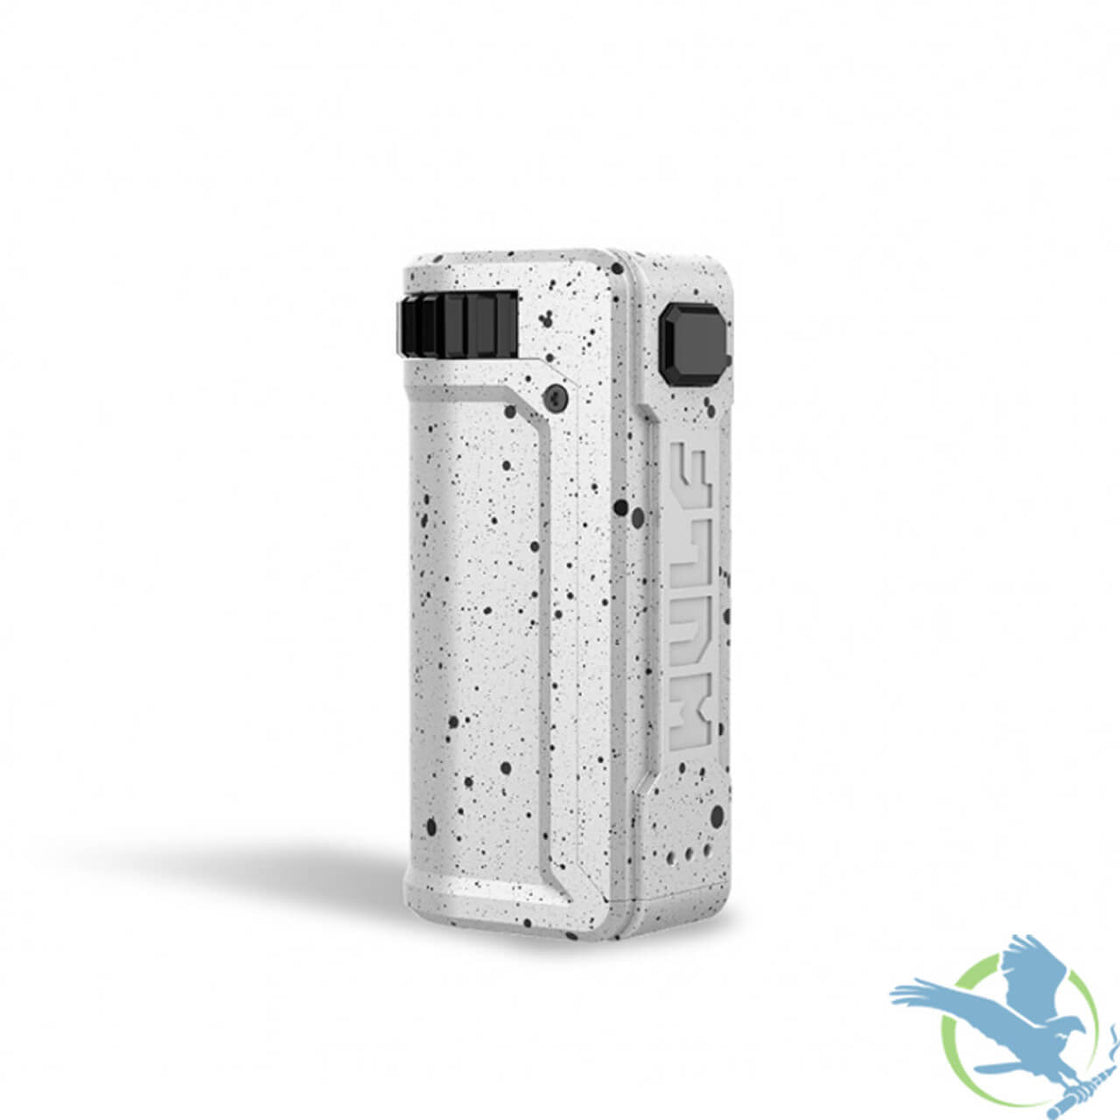 Wulf UNI S Adjustable Cartridge Vaporizer Mod Powered By Yocan - Limited Edition